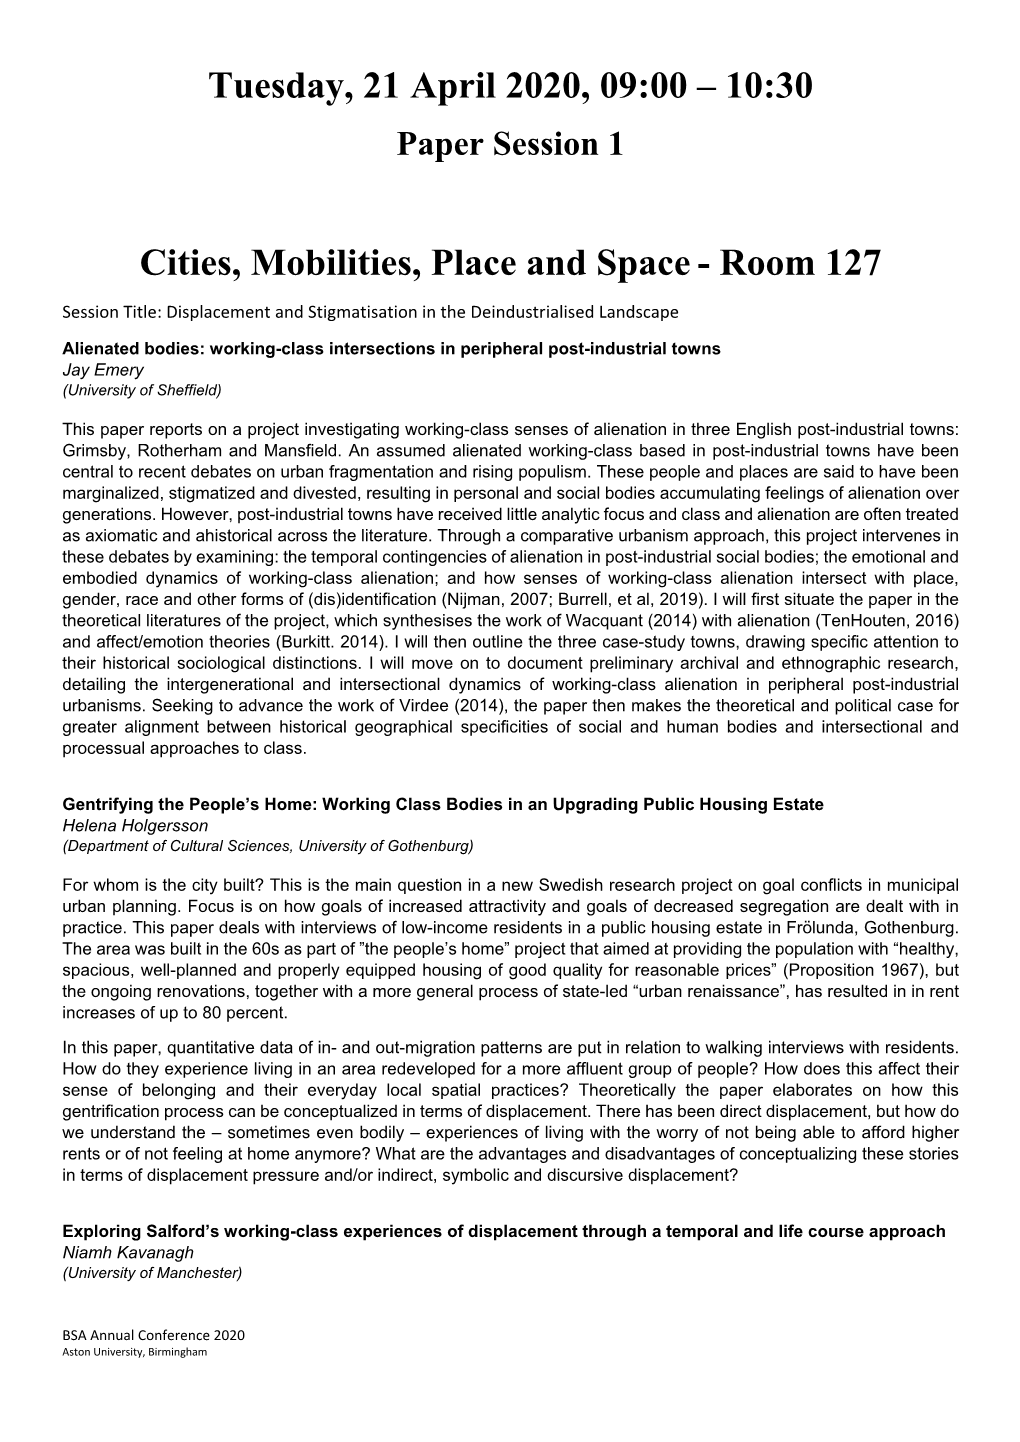 Tuesday, 21 April 2020, 09:00 – 10:30 Paper Session 1